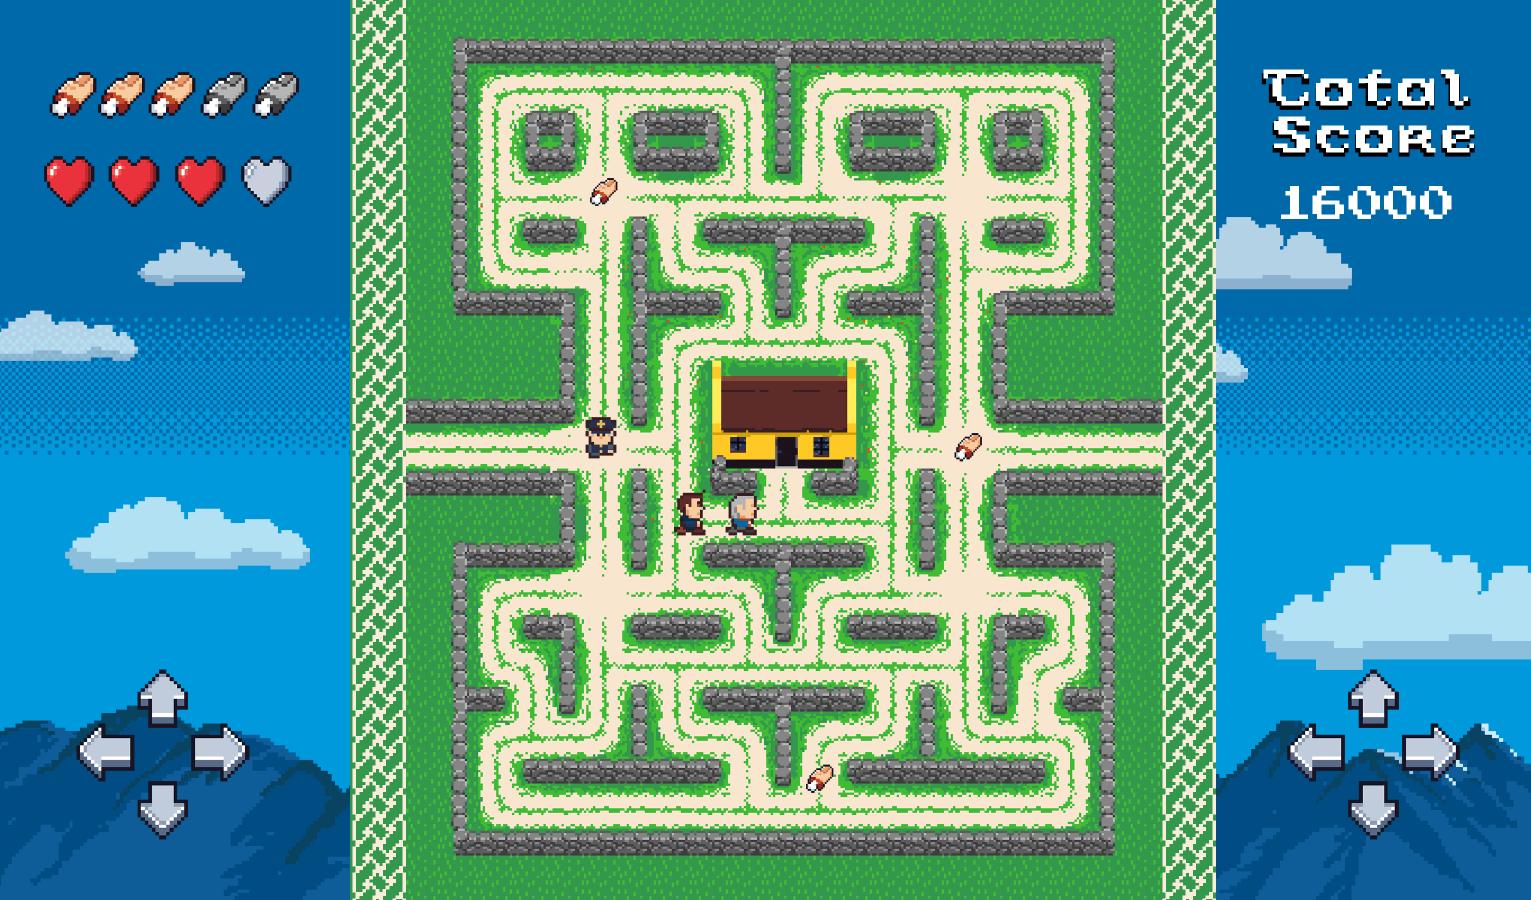 Graphic shows the maze layout of the Banshees of Inisherin game, featuring green hedgerows and an illustration of a pub at the centre